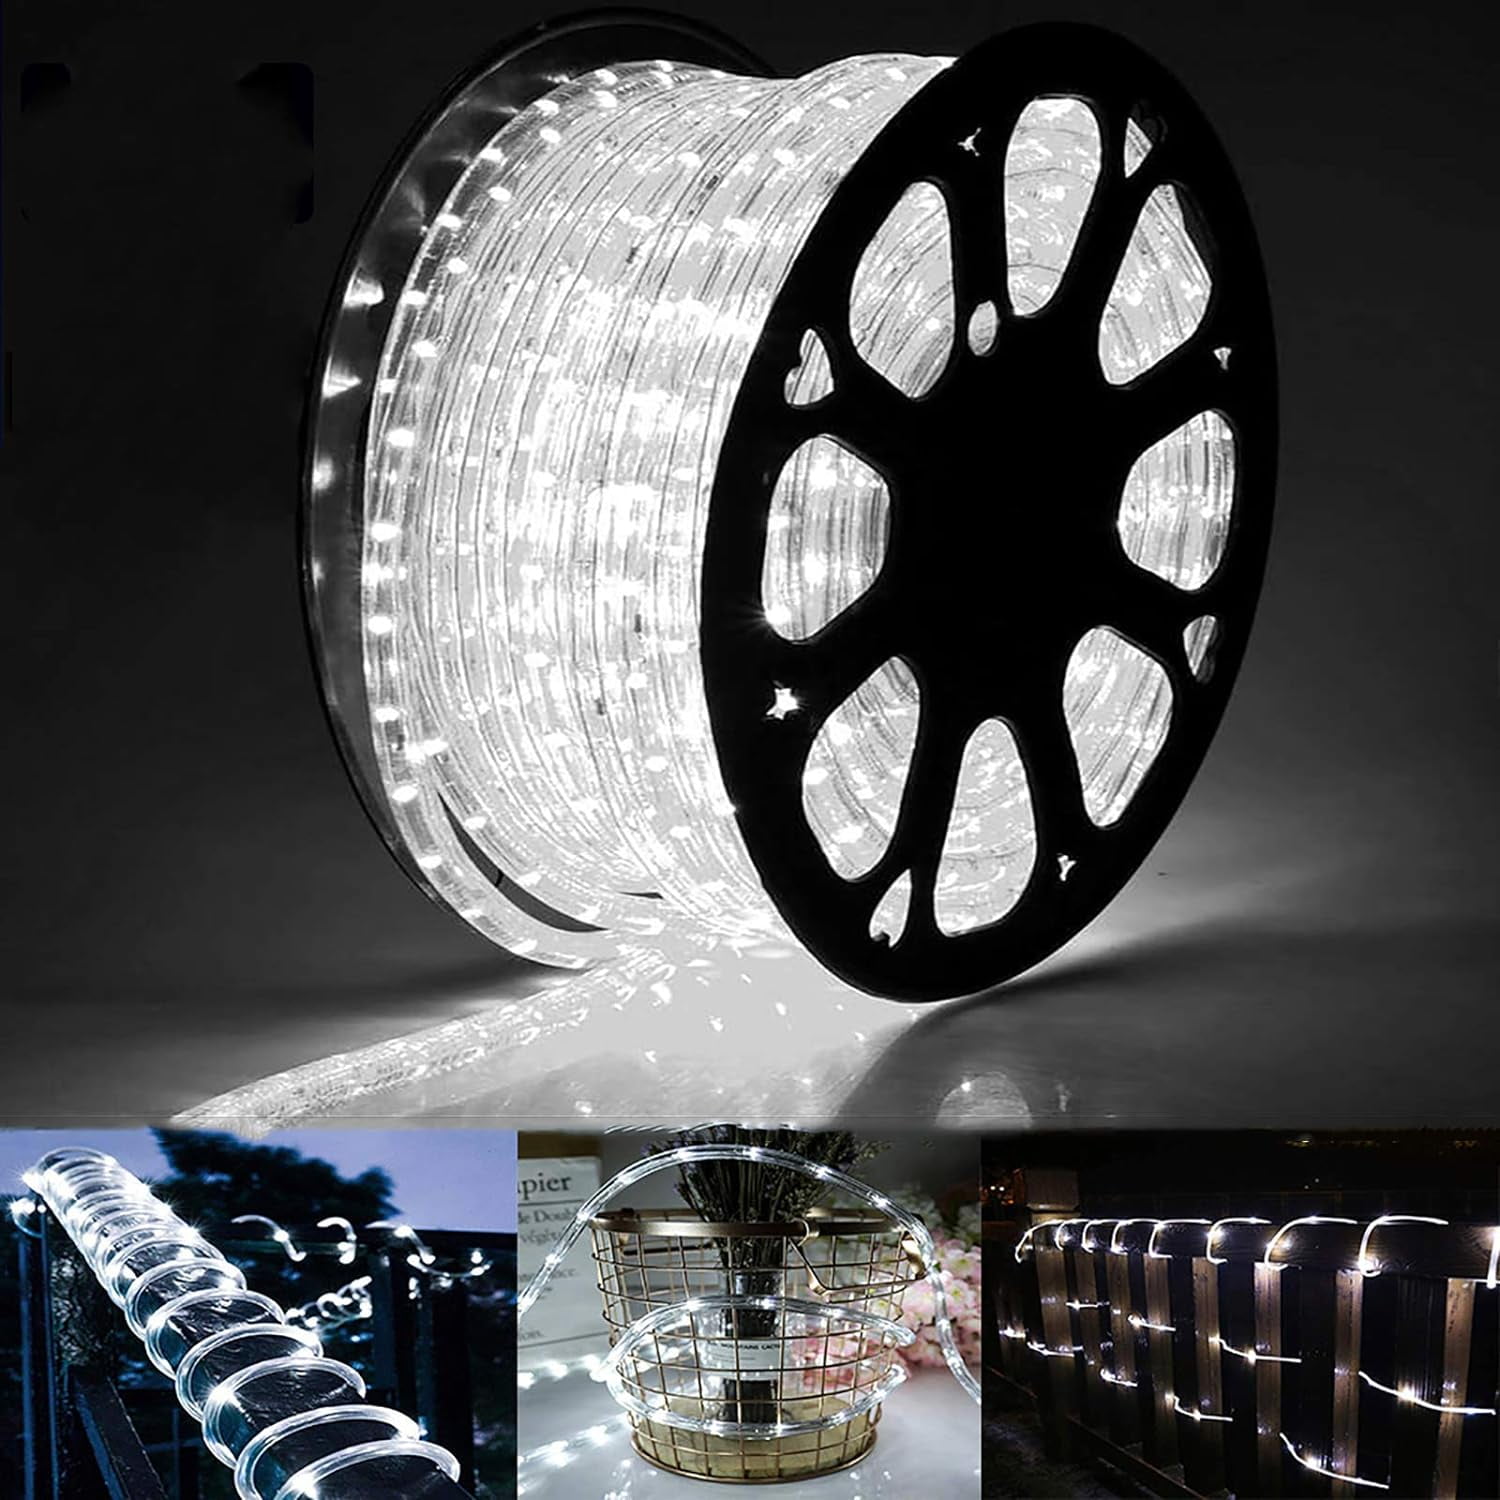 200 Ft LED Rope Lights - White Light with Remote Light Waterproof 4 Mode  Landscape Light for Halloween Xmas Party Wedding Pool Holiday Home Decor 